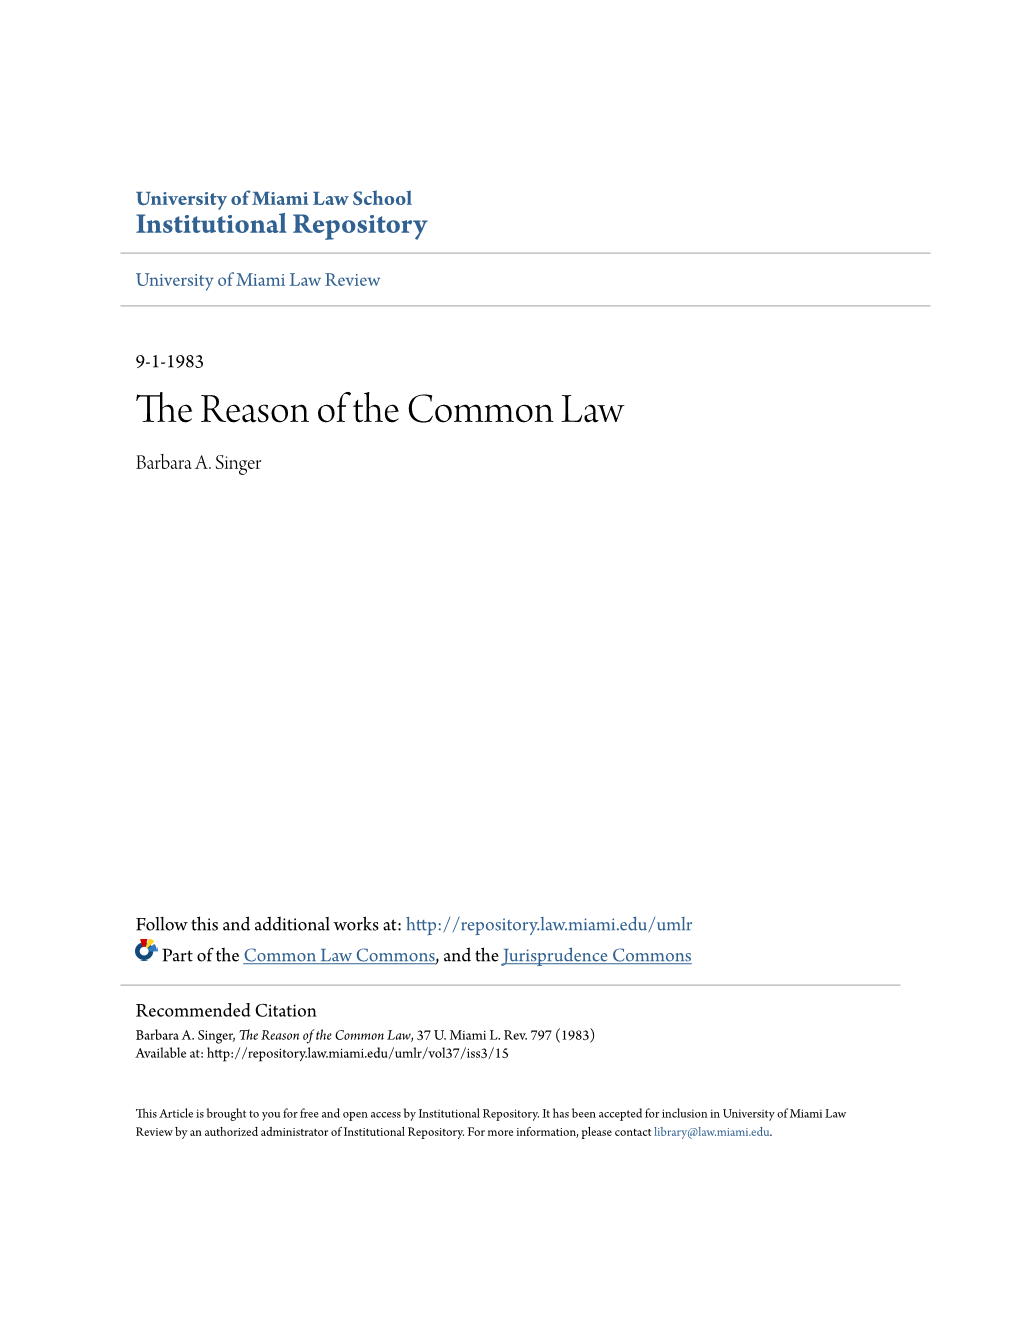 The Reason of the Common Law Barbara A